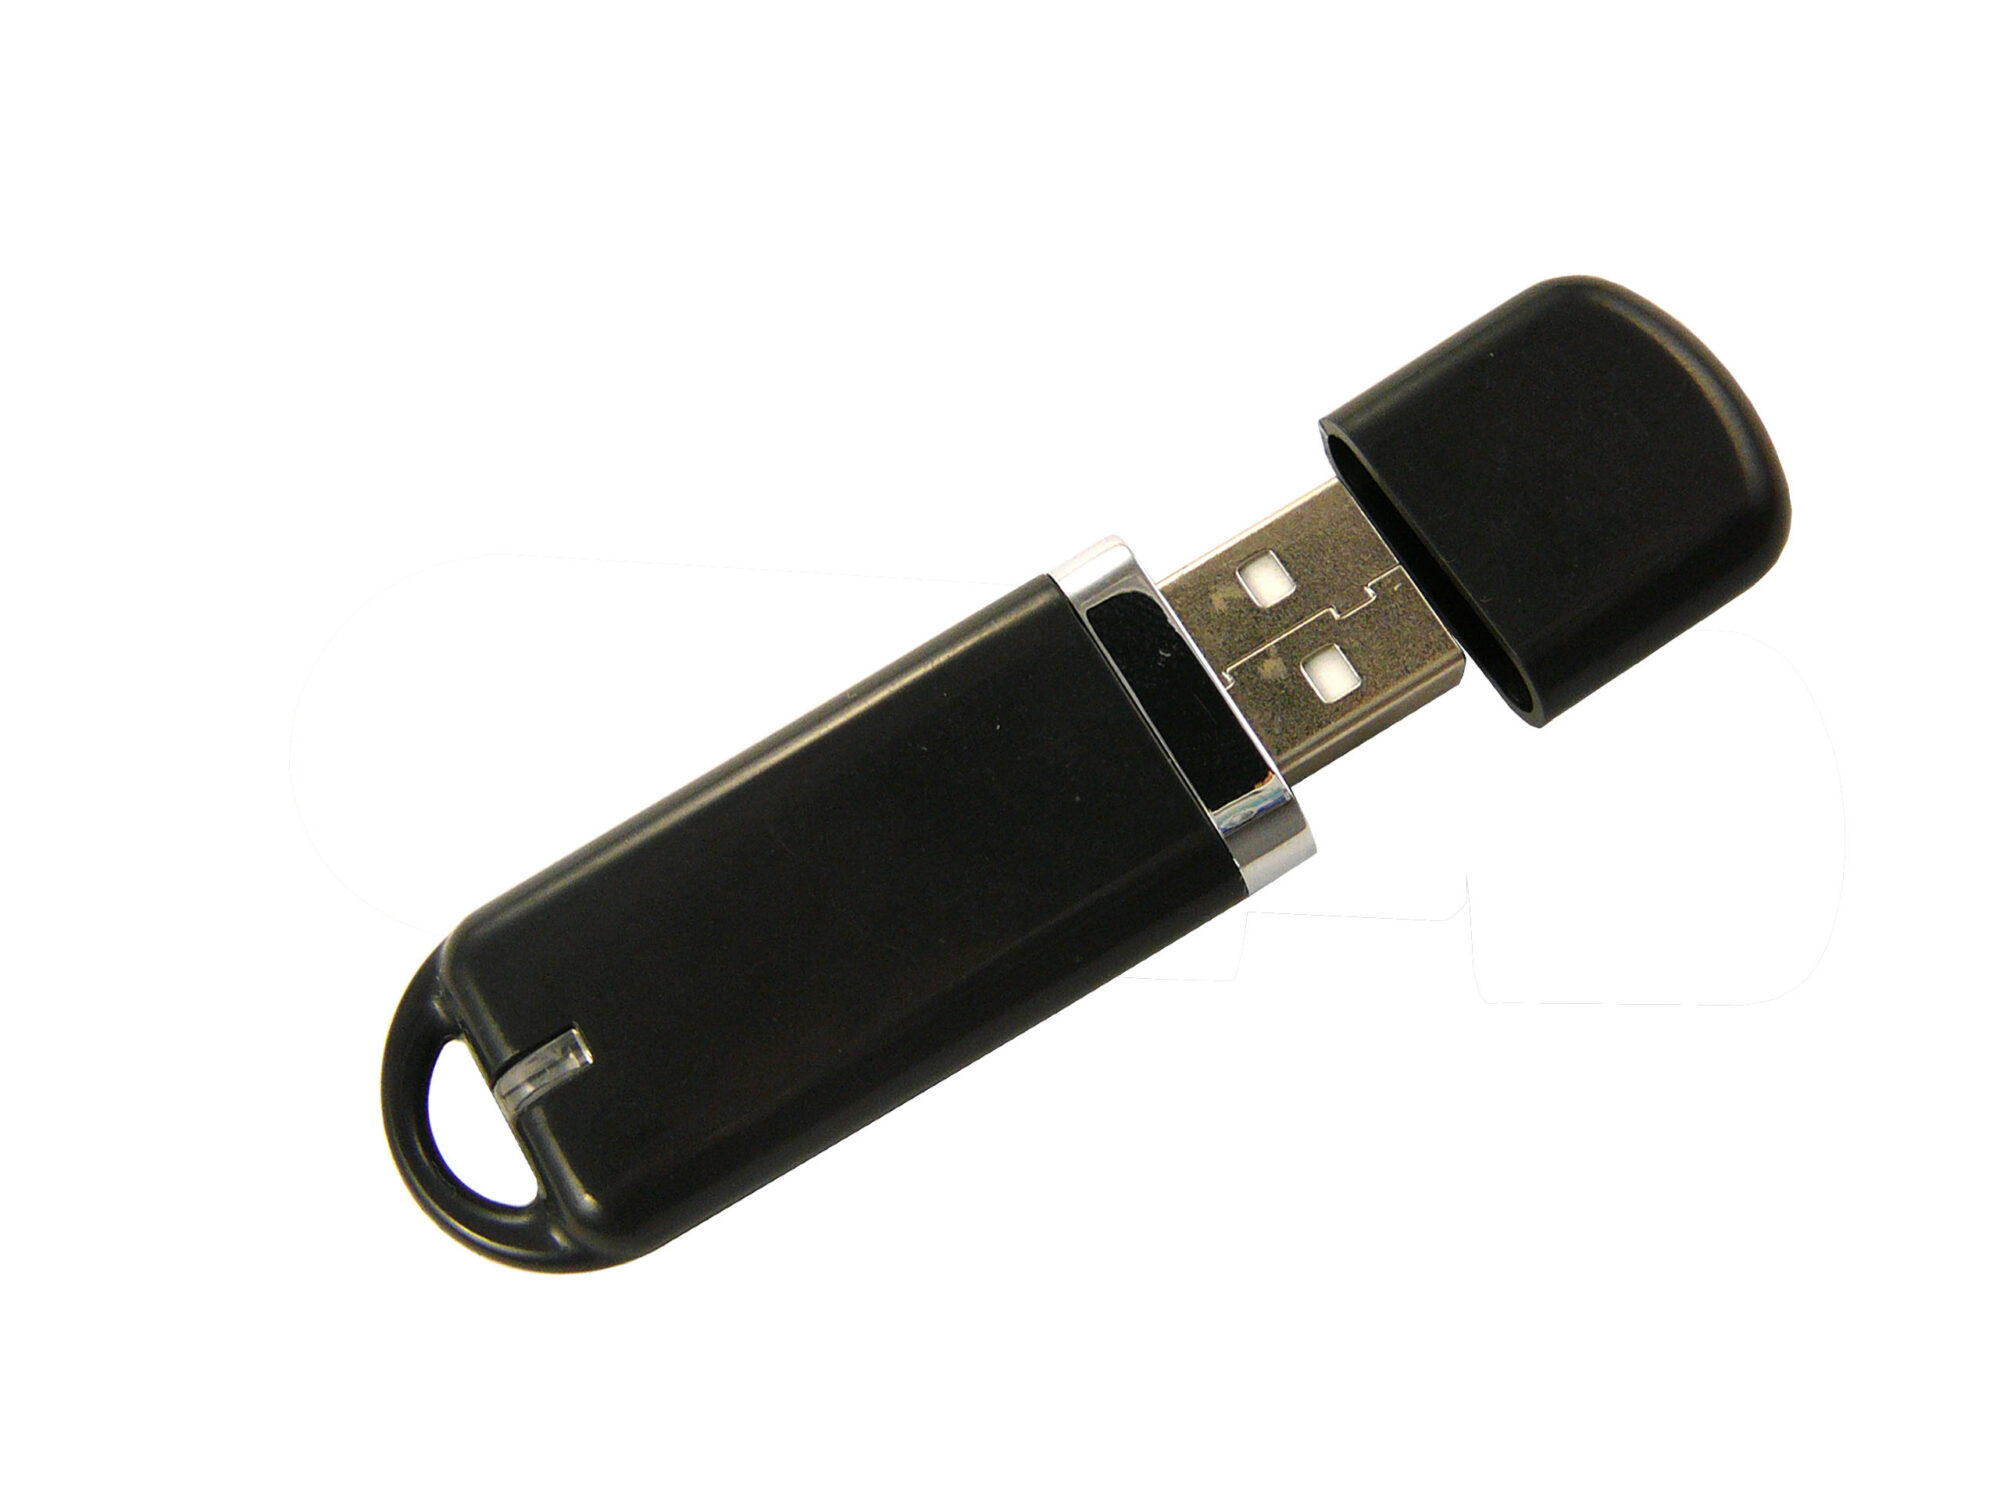 transfer just one bookmark to a usb drive